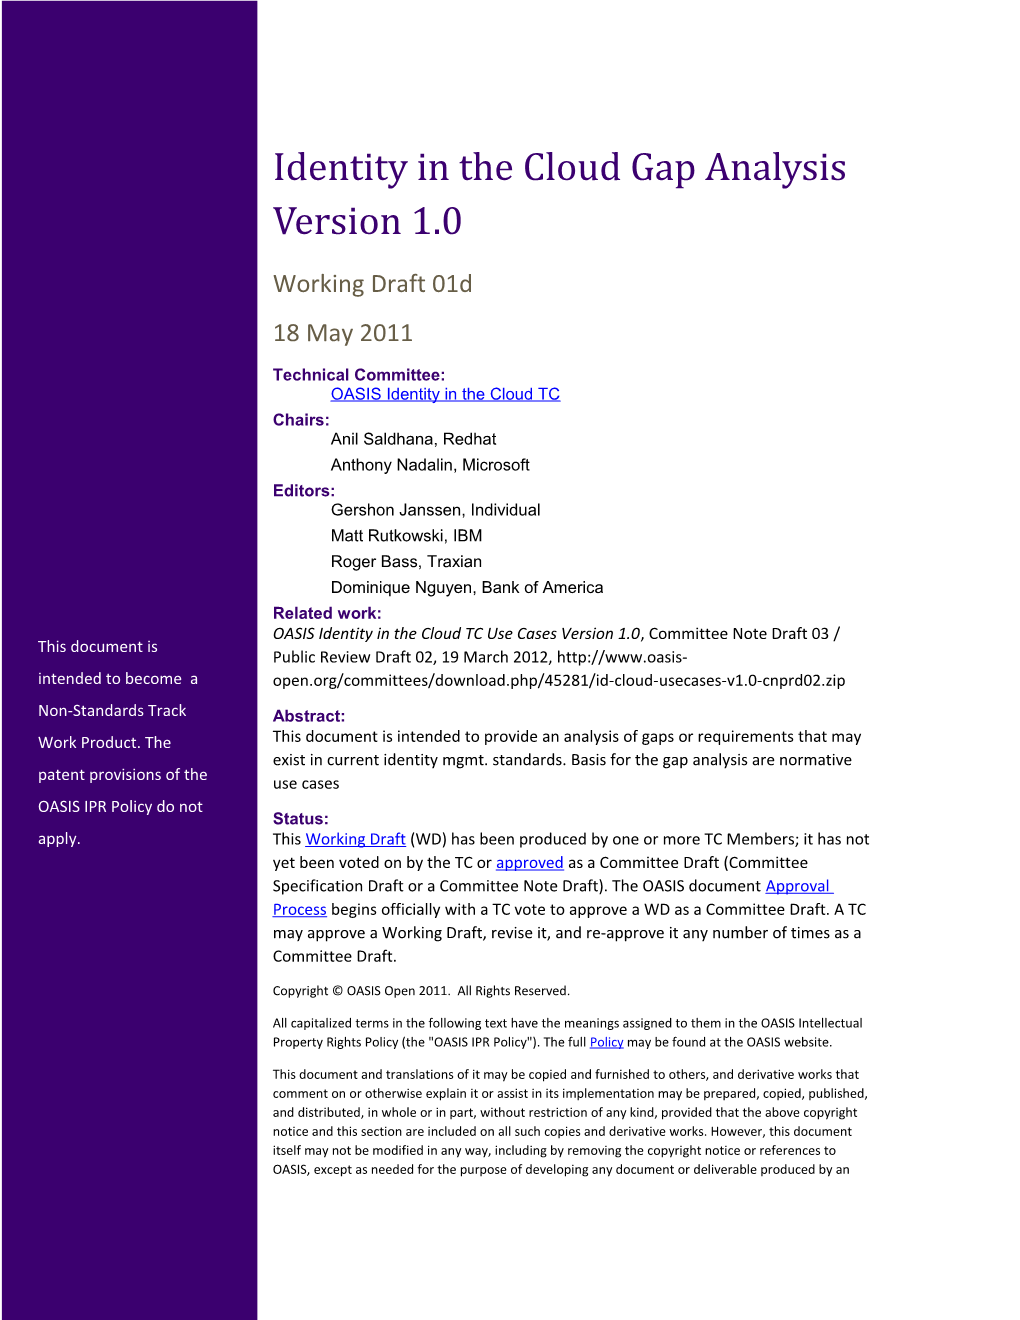 Identity in the Cloud Gap Analysis Version 1.0